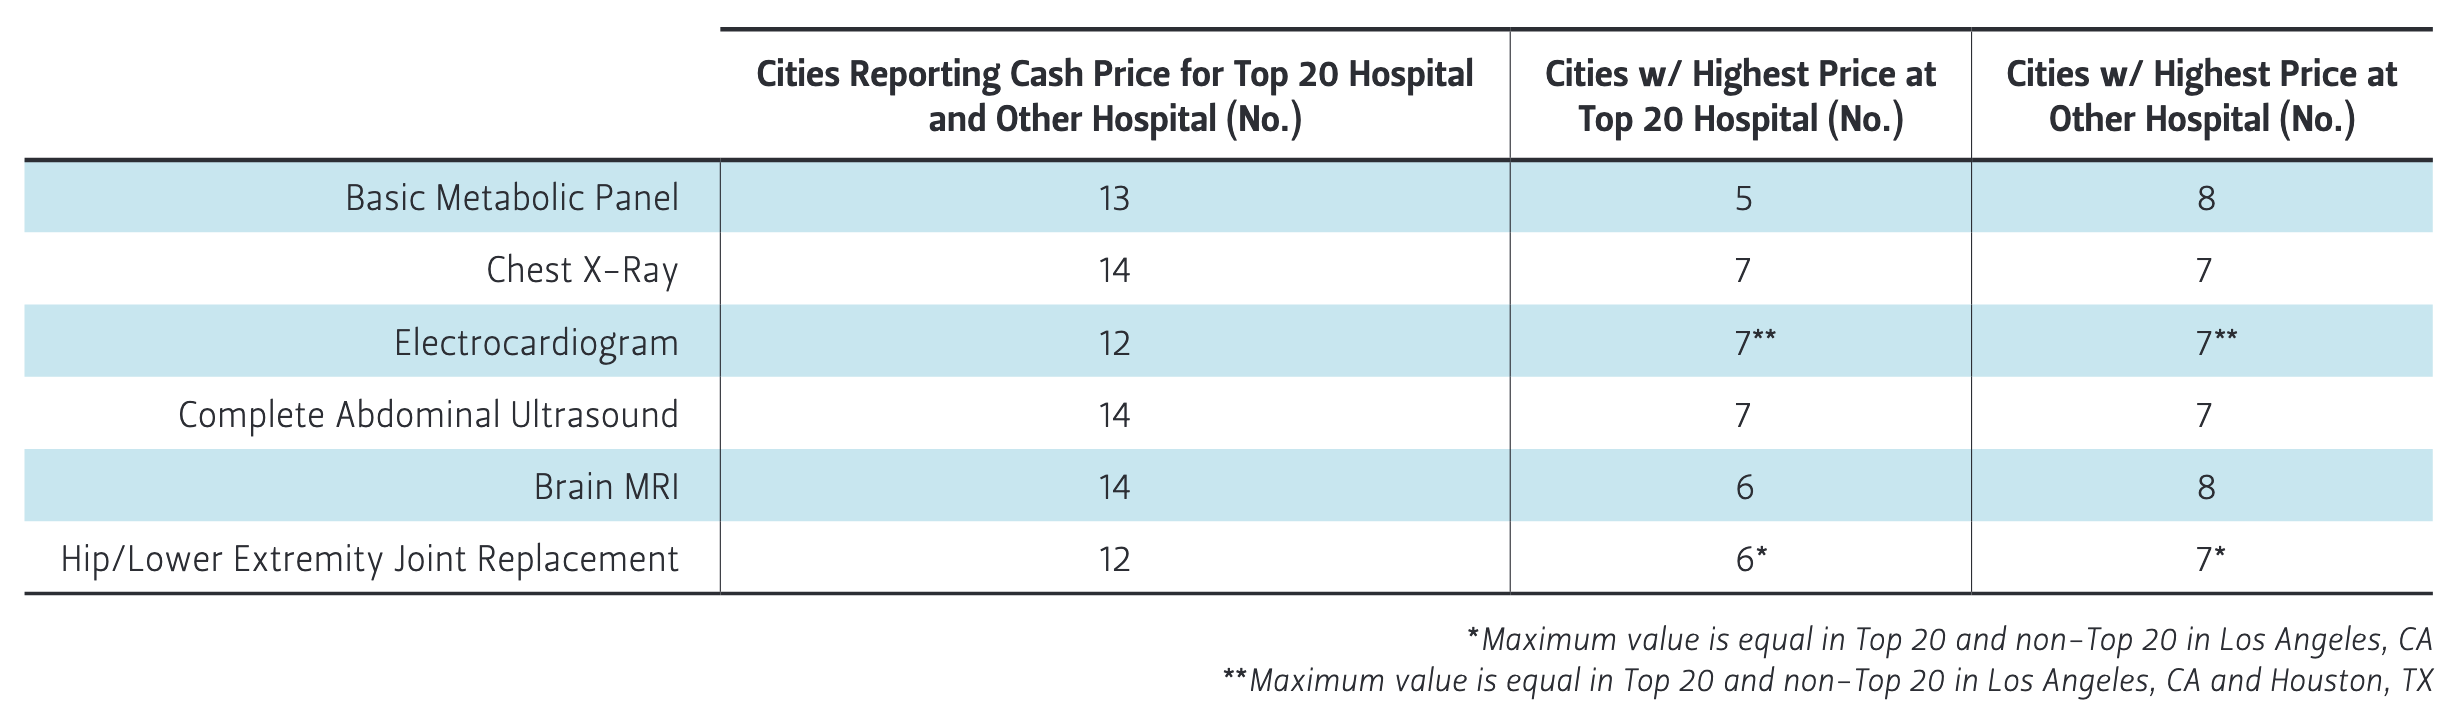 Table 3 — Cities Where Top 20 Hospital Has Highest Cash Price by Service